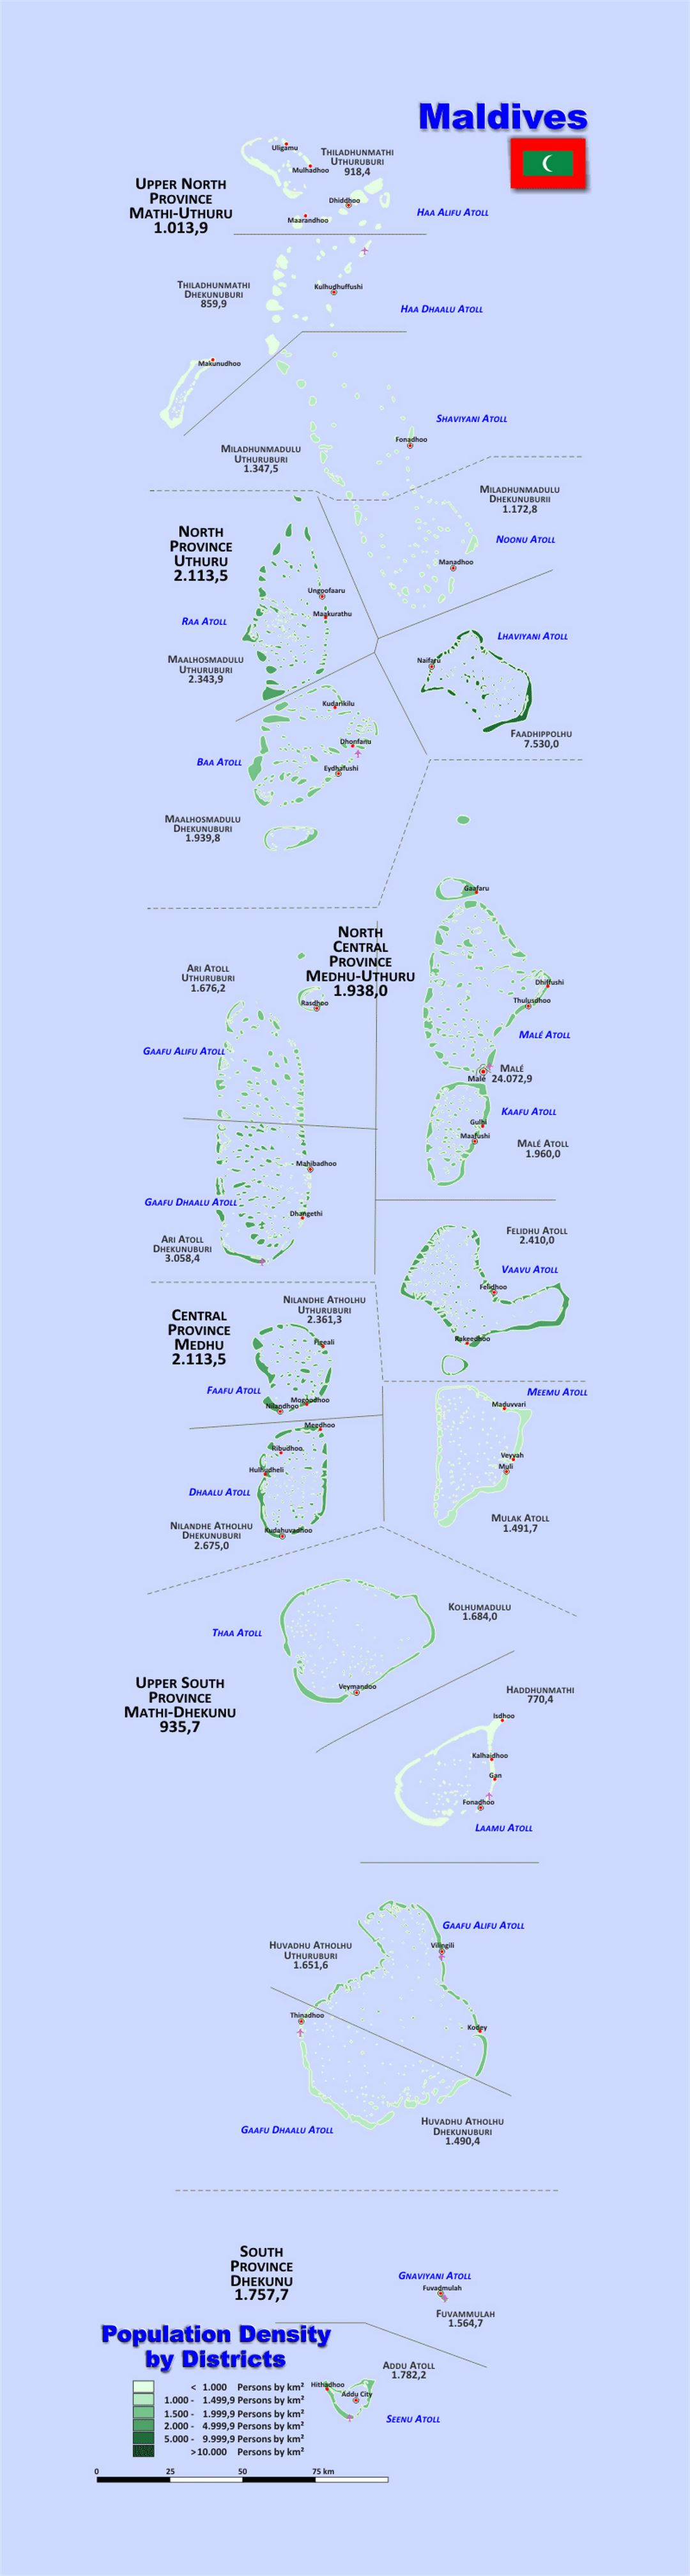 Detailed population density by districts map of Maldives